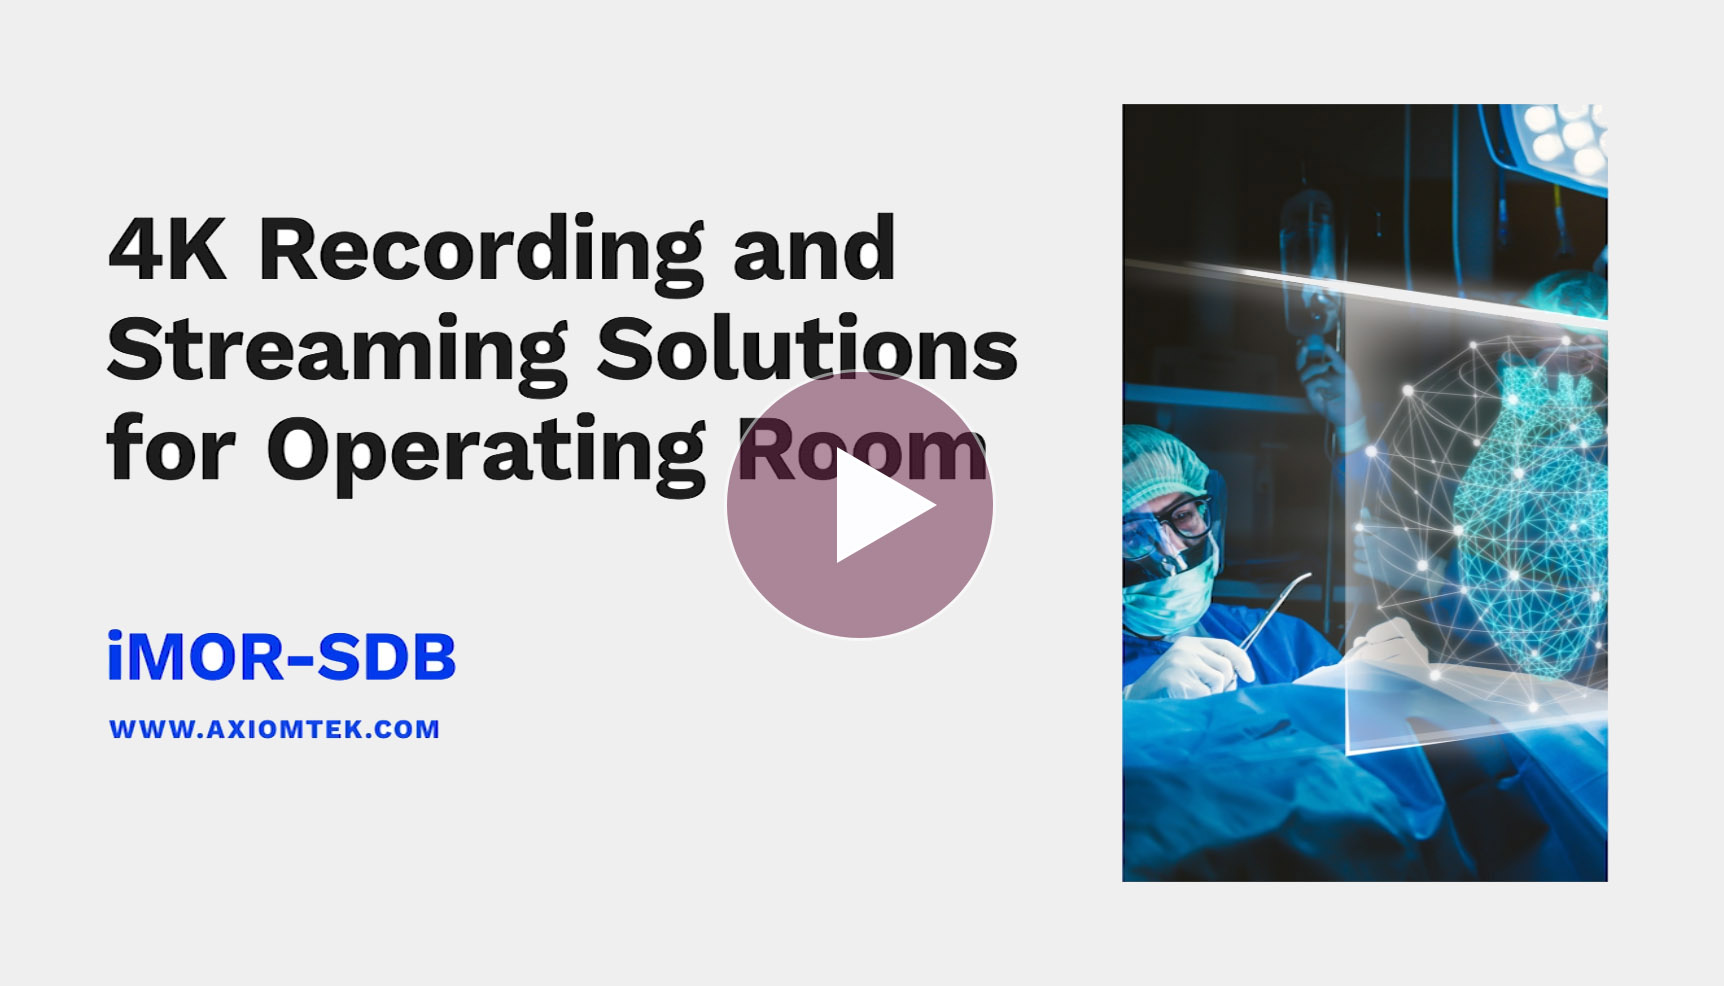 4K Recording and Streaming Solution for Operating Room - iMOR-SDB